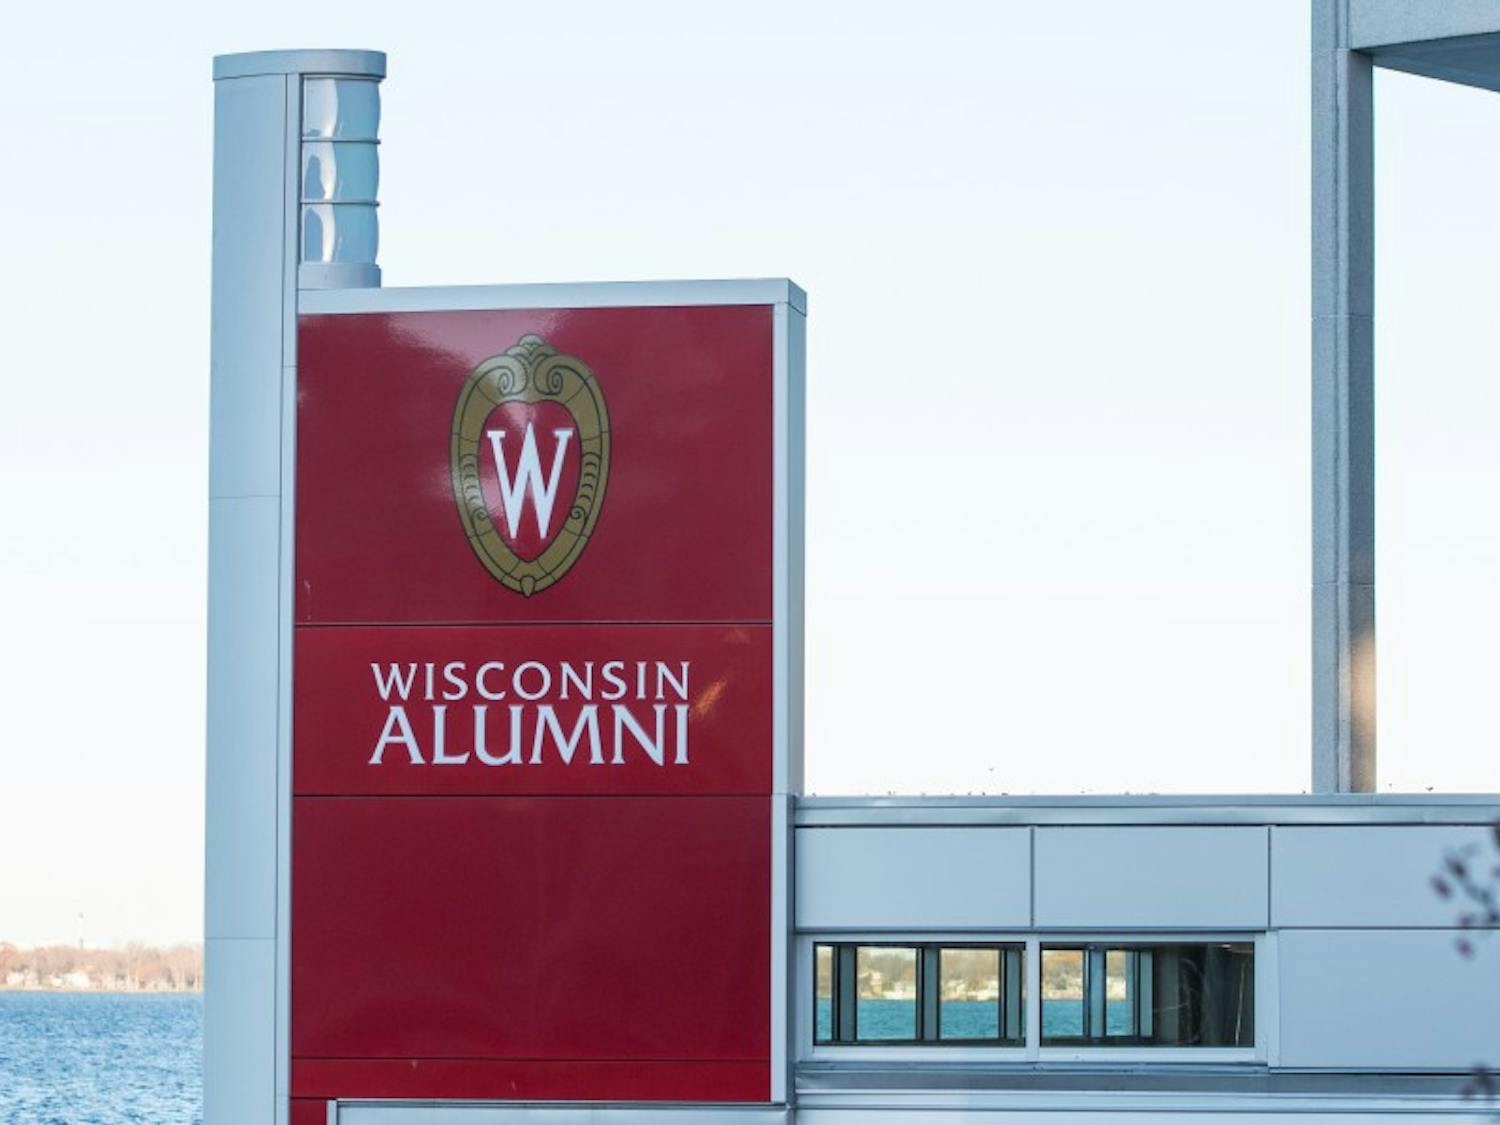 The office collaborates with UW-Madison, the Wisconsin Alumni Research Foundation and other partners both on and off campus